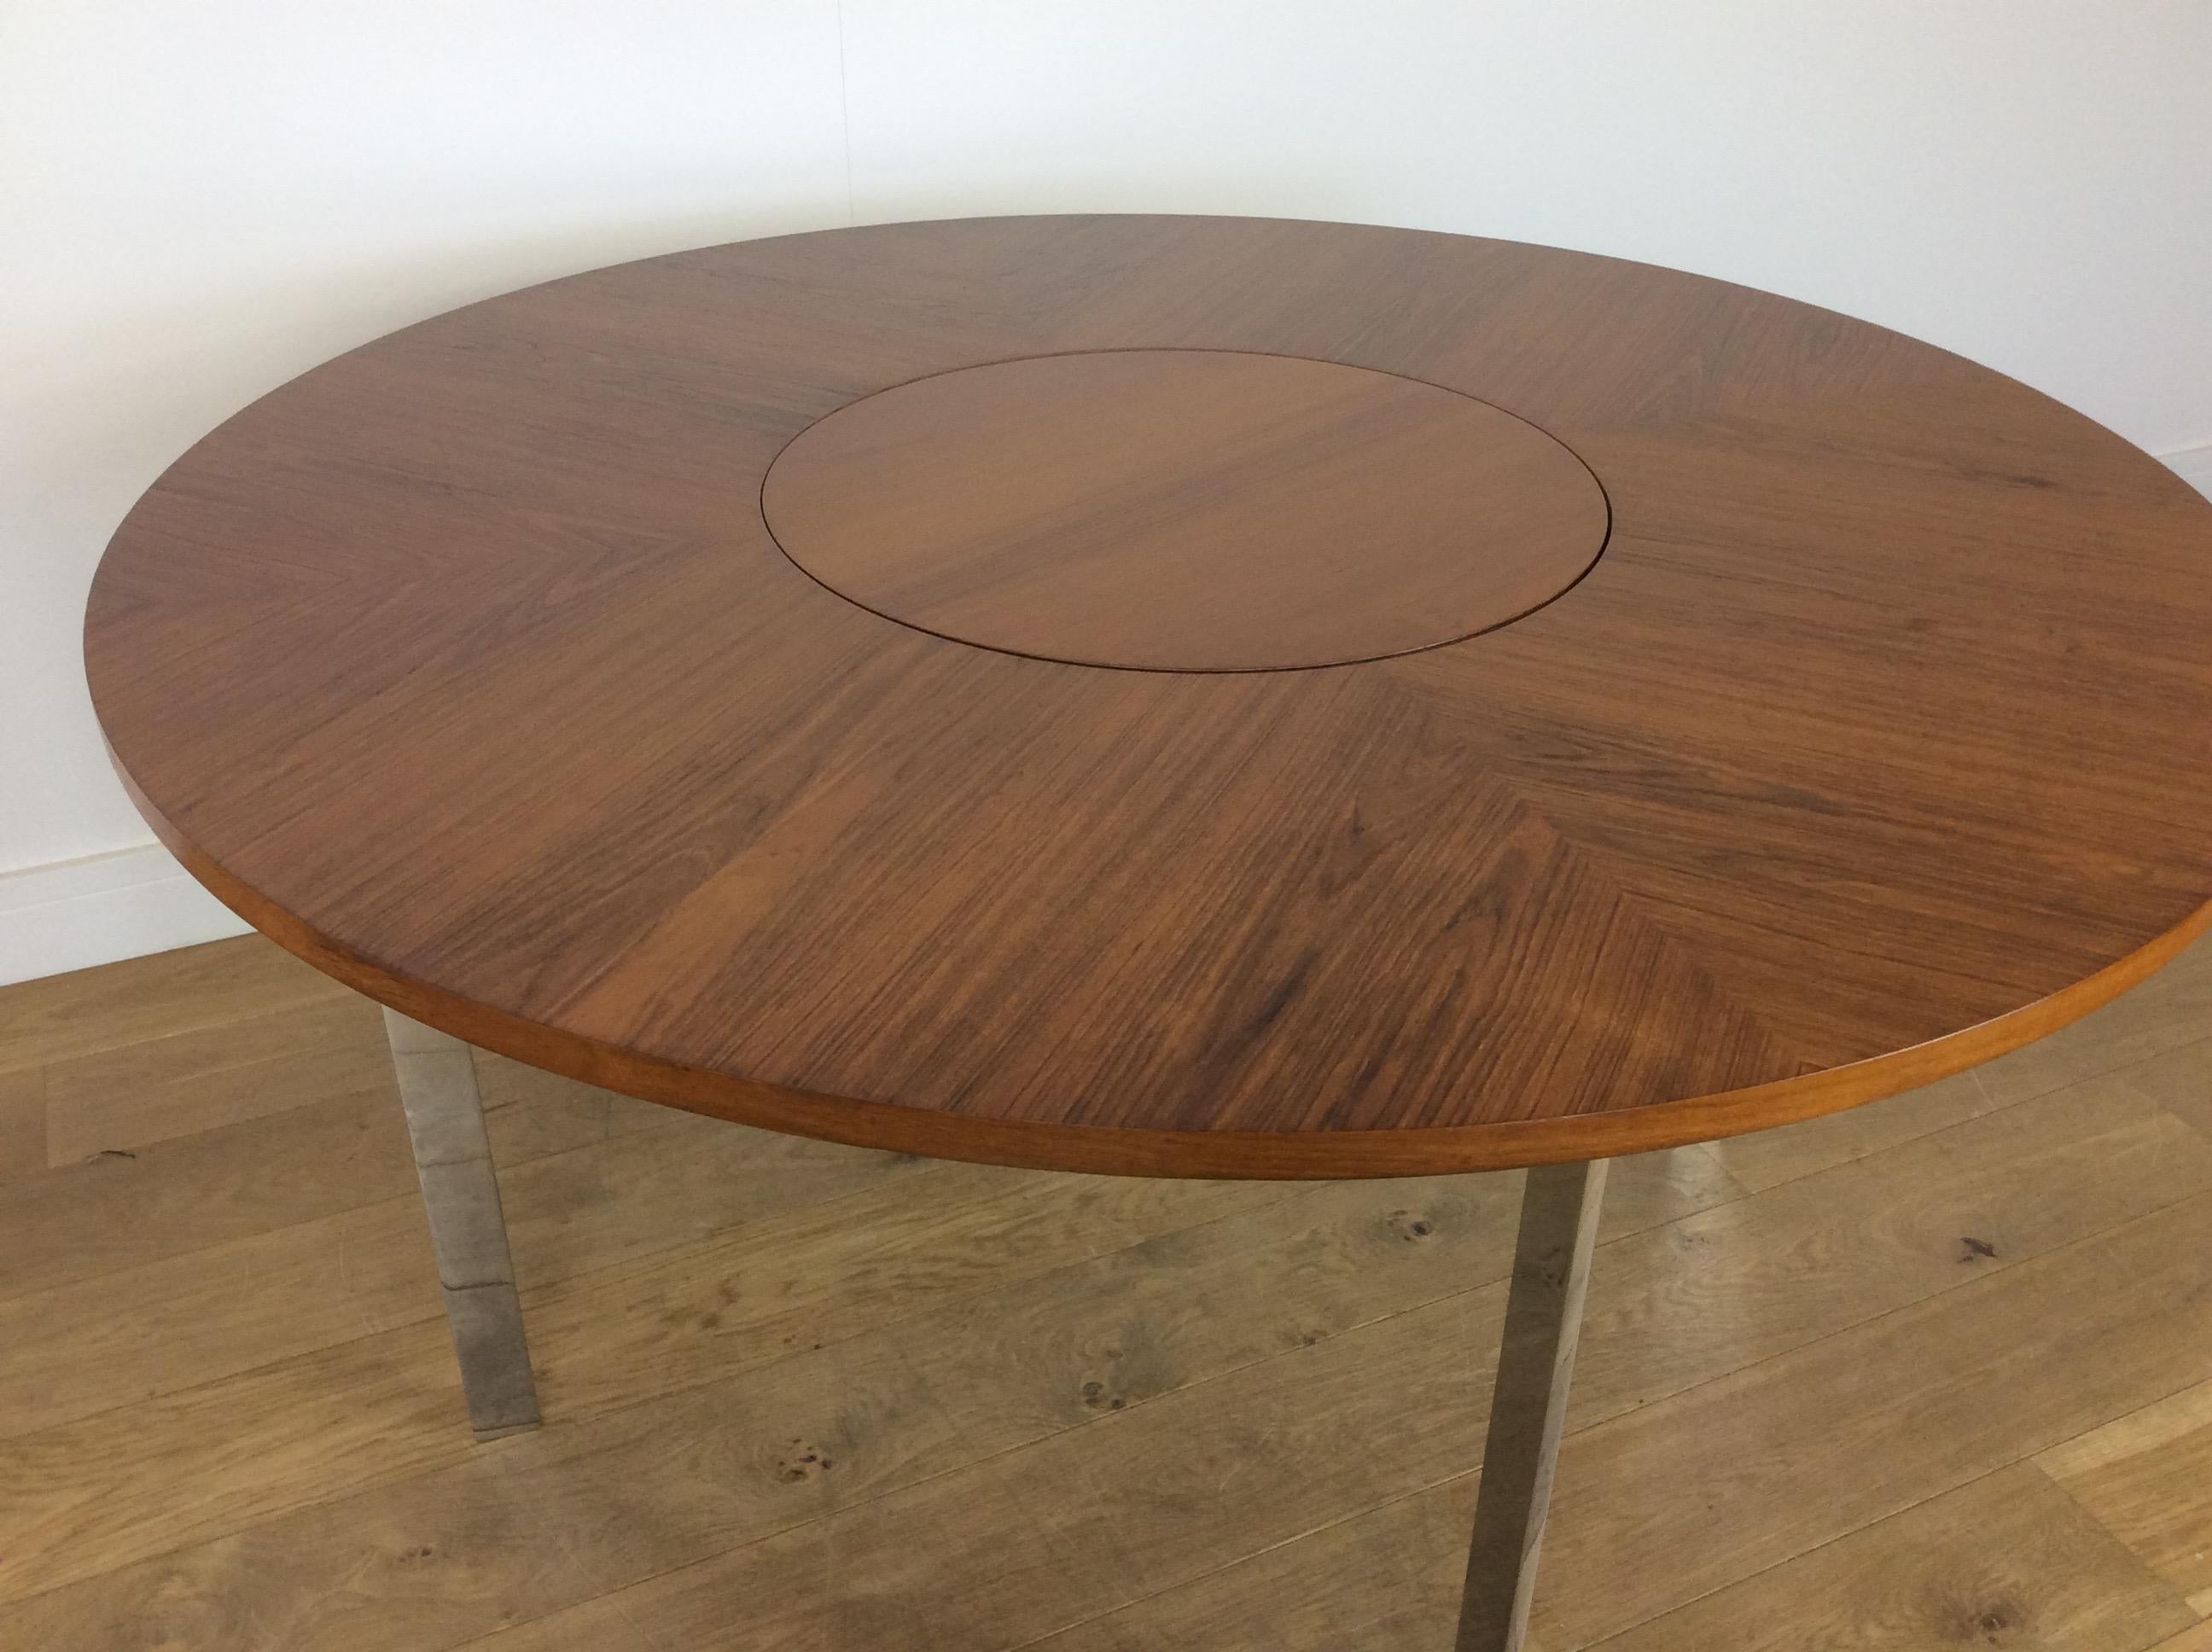 British Midcentury Rosewood Dining Table by Merrow Associates